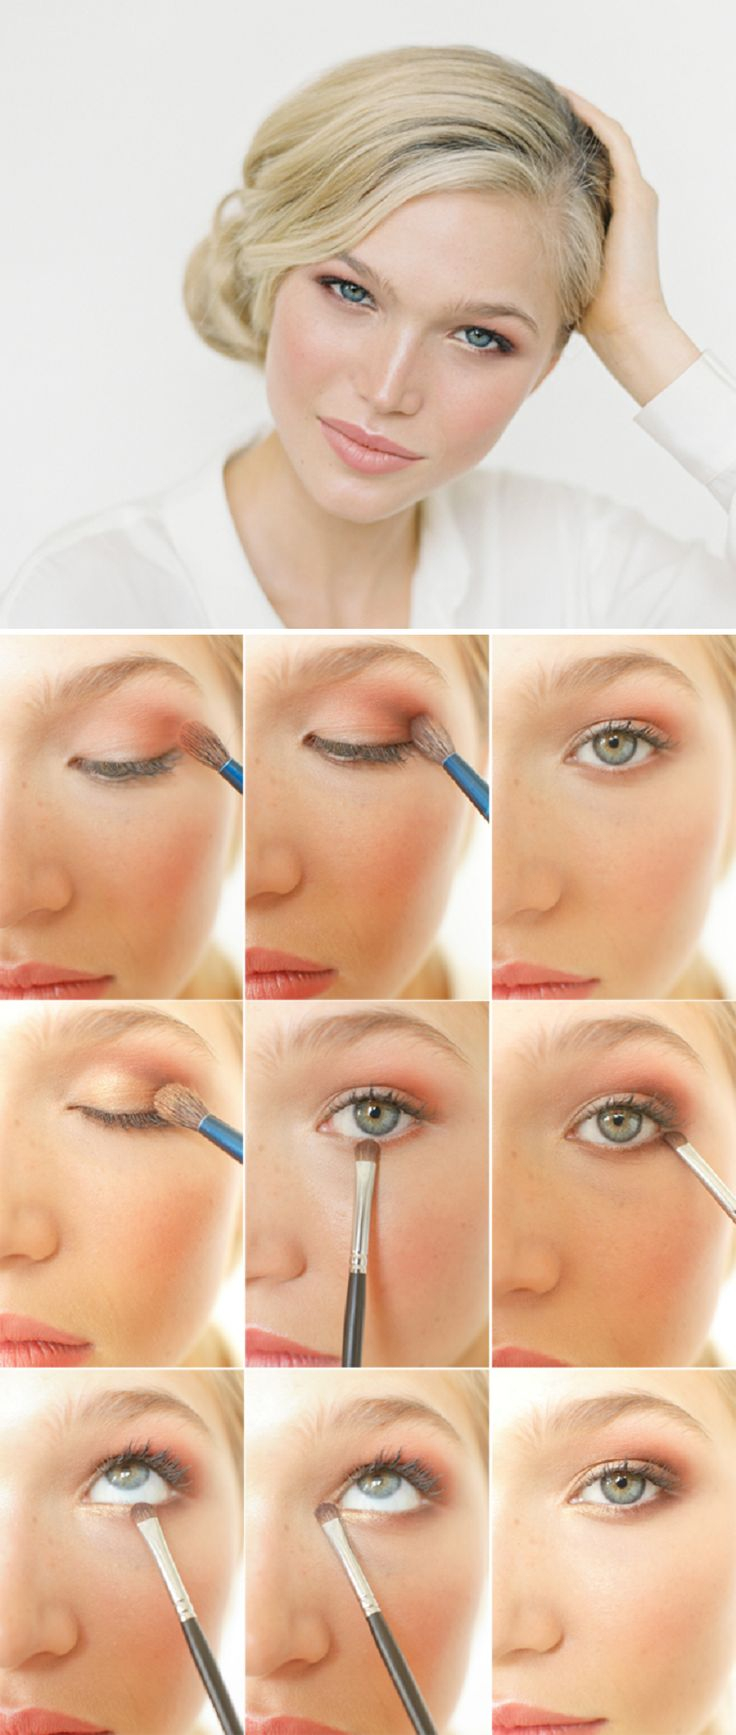 Best Makeup For Green Eyes Makeup Tips Diy Eyeshadow For Your Eye Color Green Eyes 15 Best